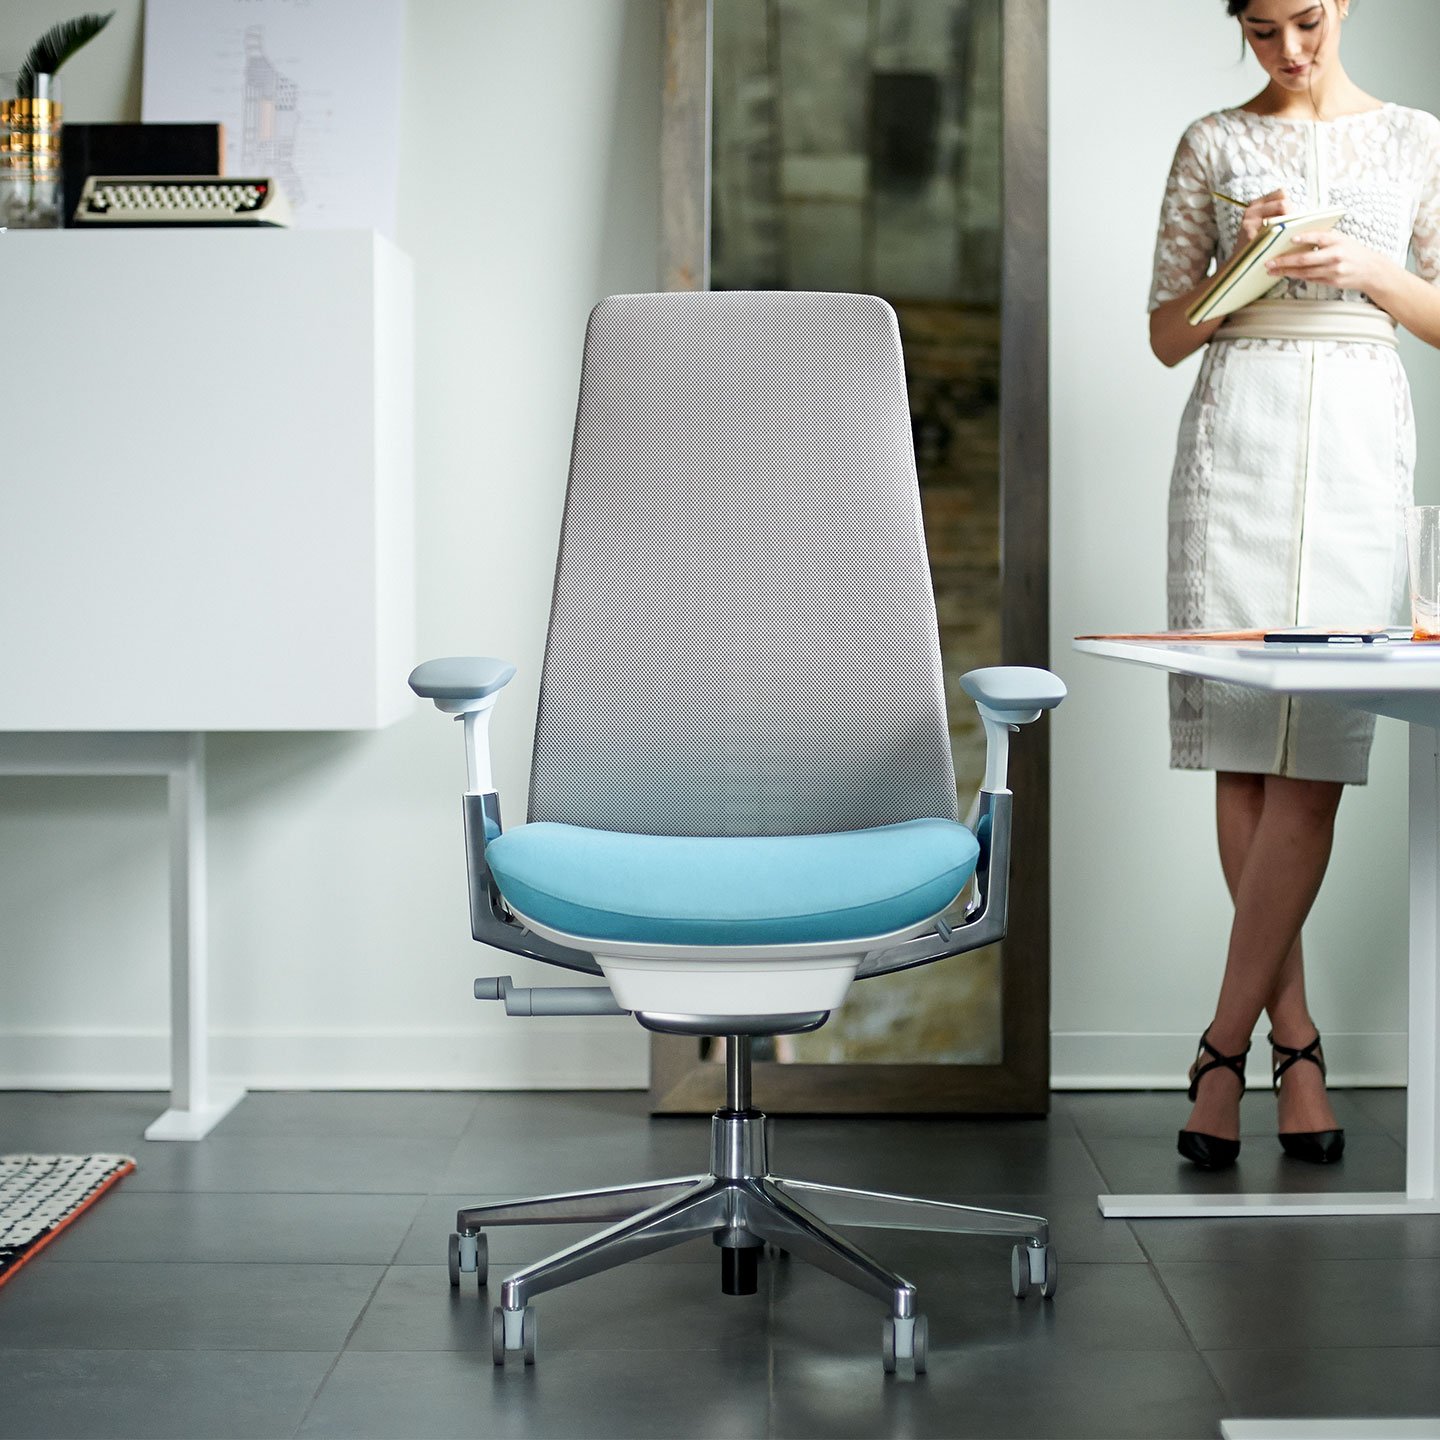 Haworth Fern task chair in grey and blue color in a office space